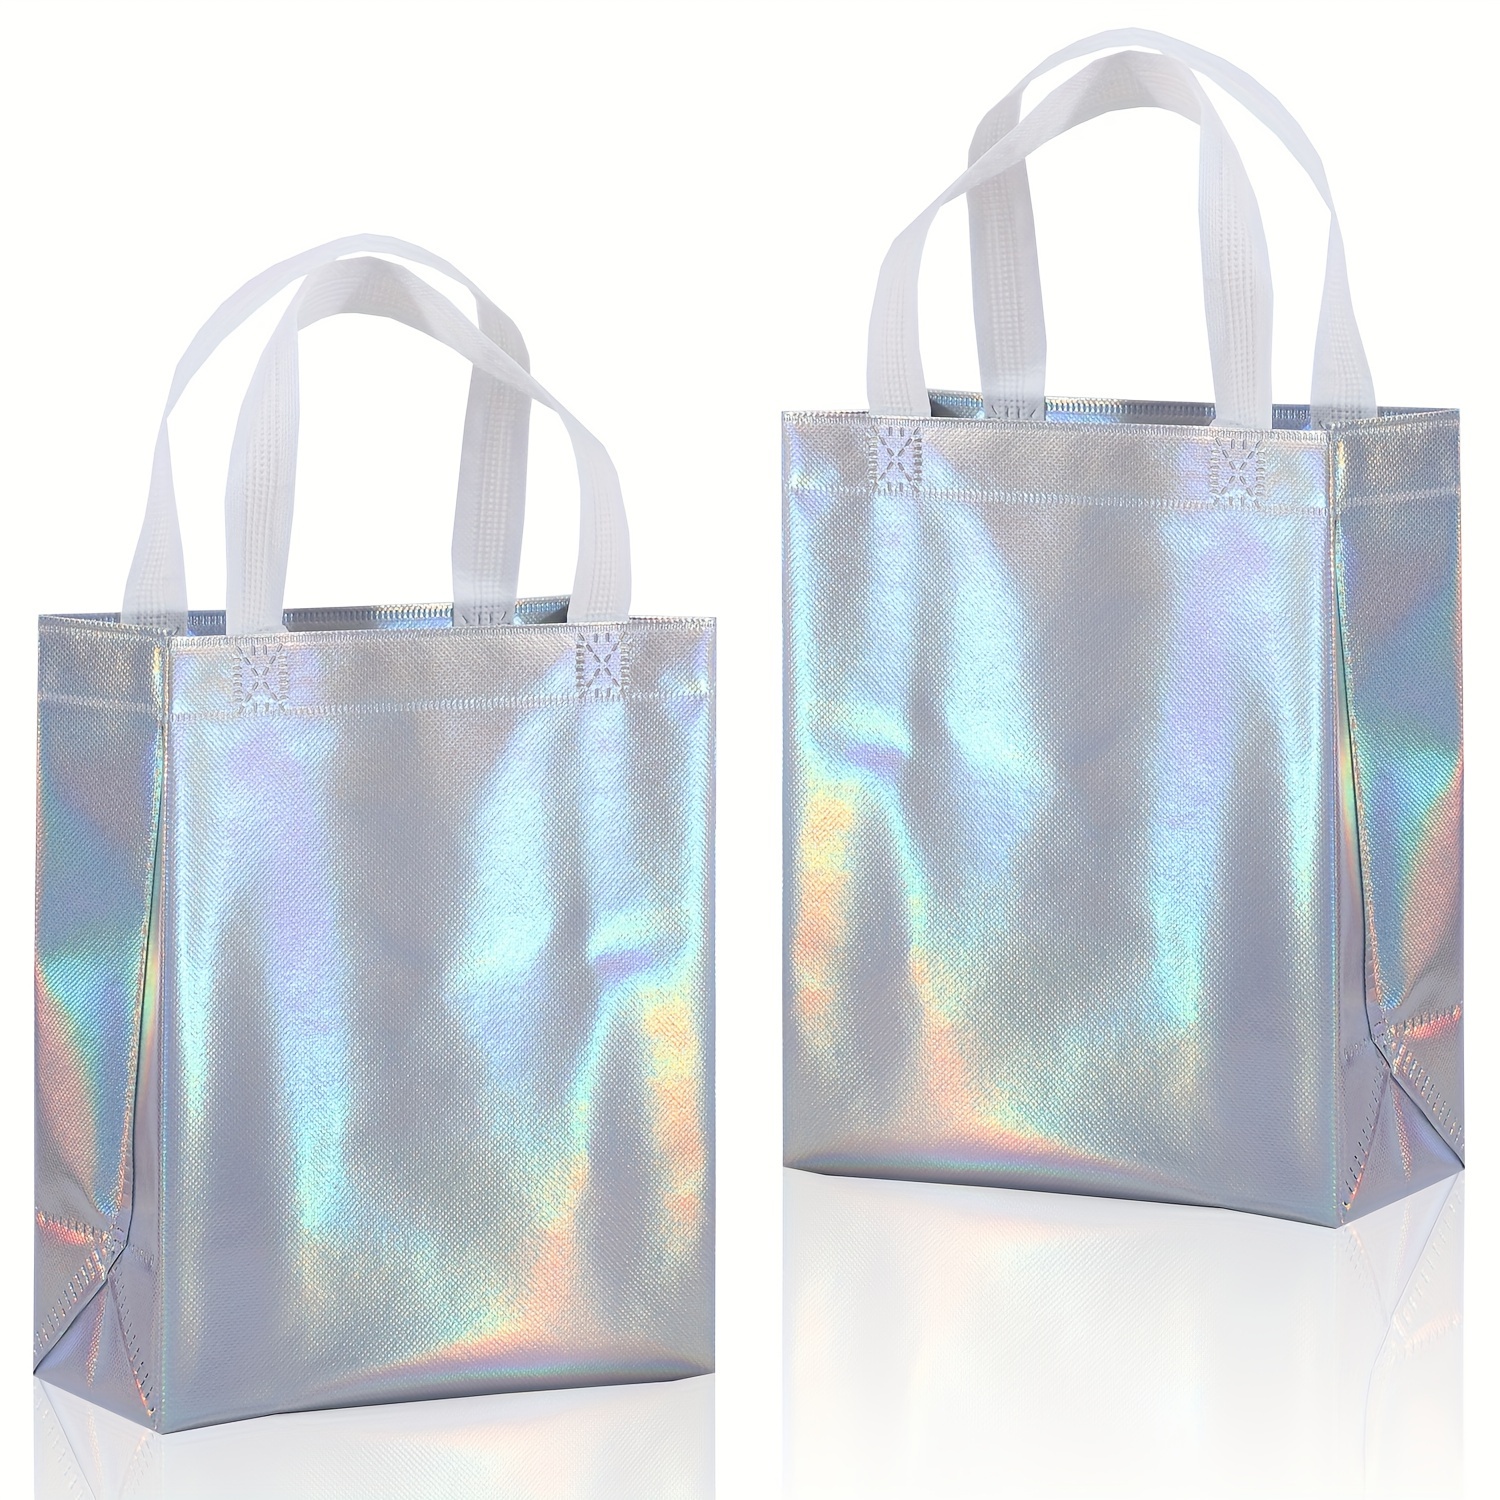 

Set Of 16 Iridescent Holographic Gift Bags With Handles - Reusable, Medium Size For Birthdays, Party Favors & Goodies - Rainbow Theme, Durable Pp Material Small Gift Bags Gift Bags For Gifts